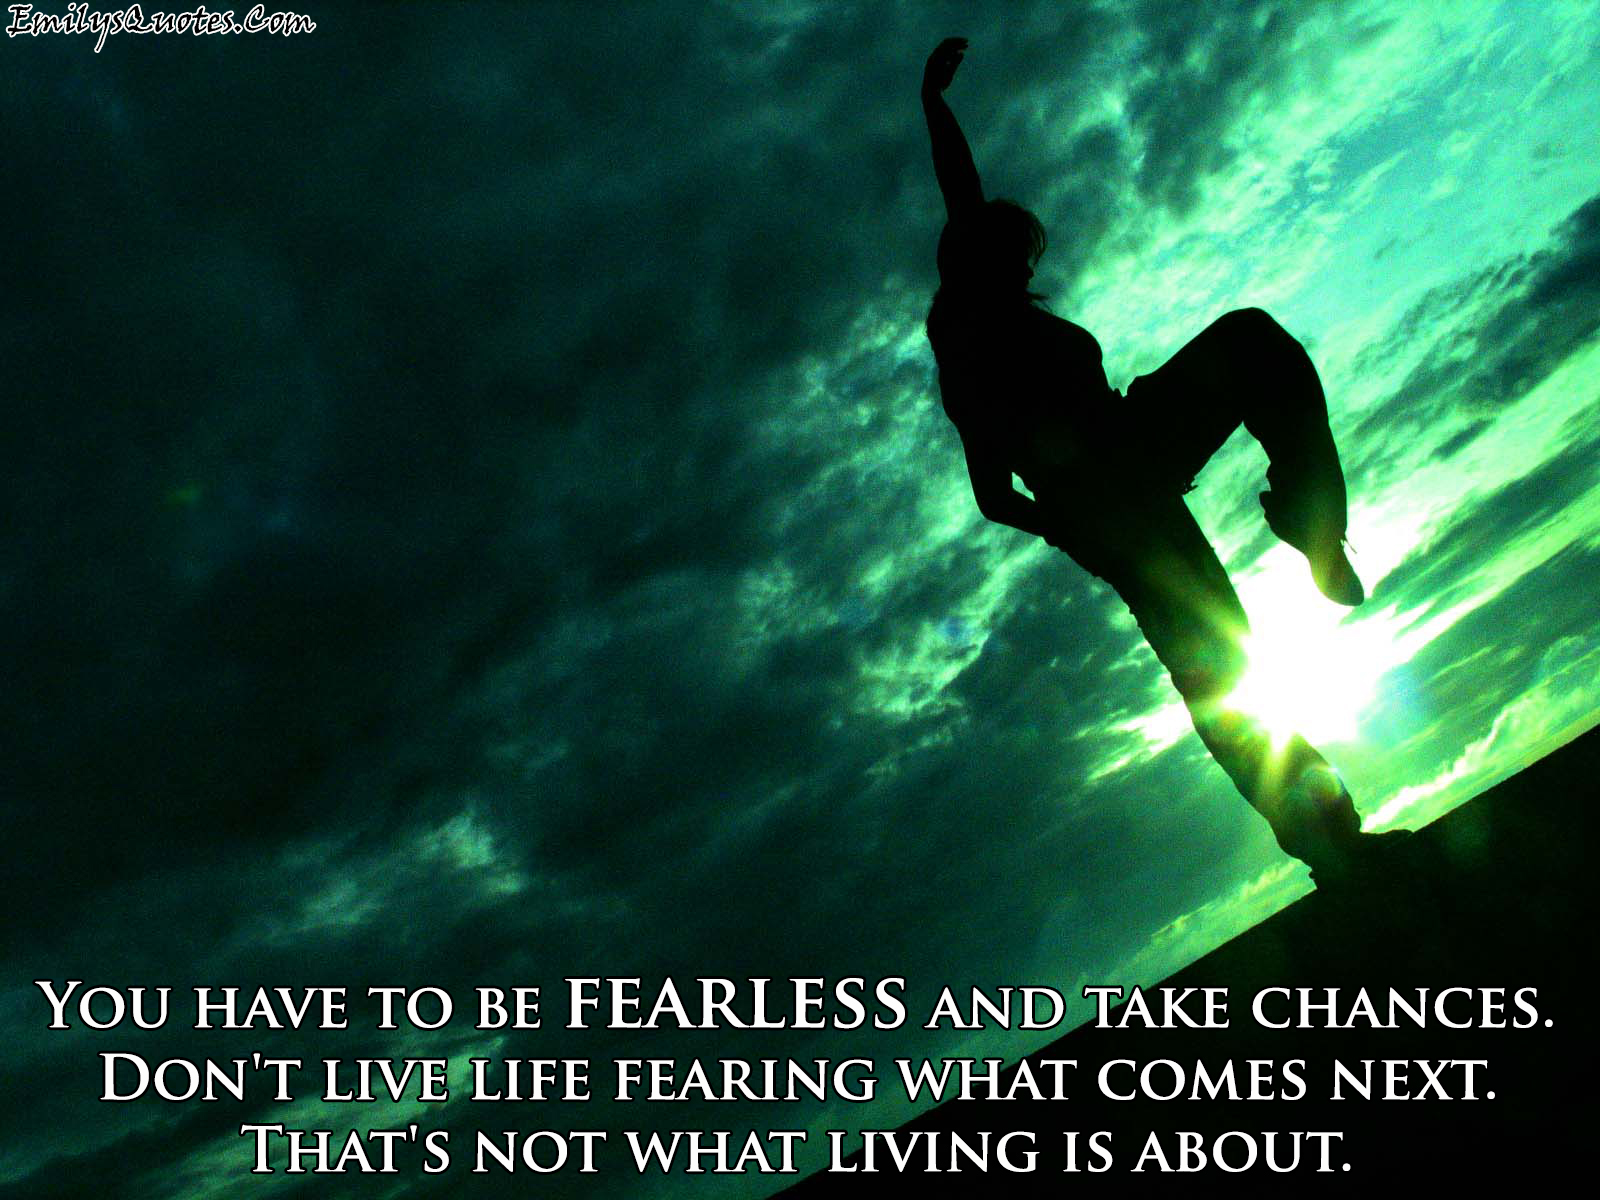 You have to be fearless and take chances. Don’t live life